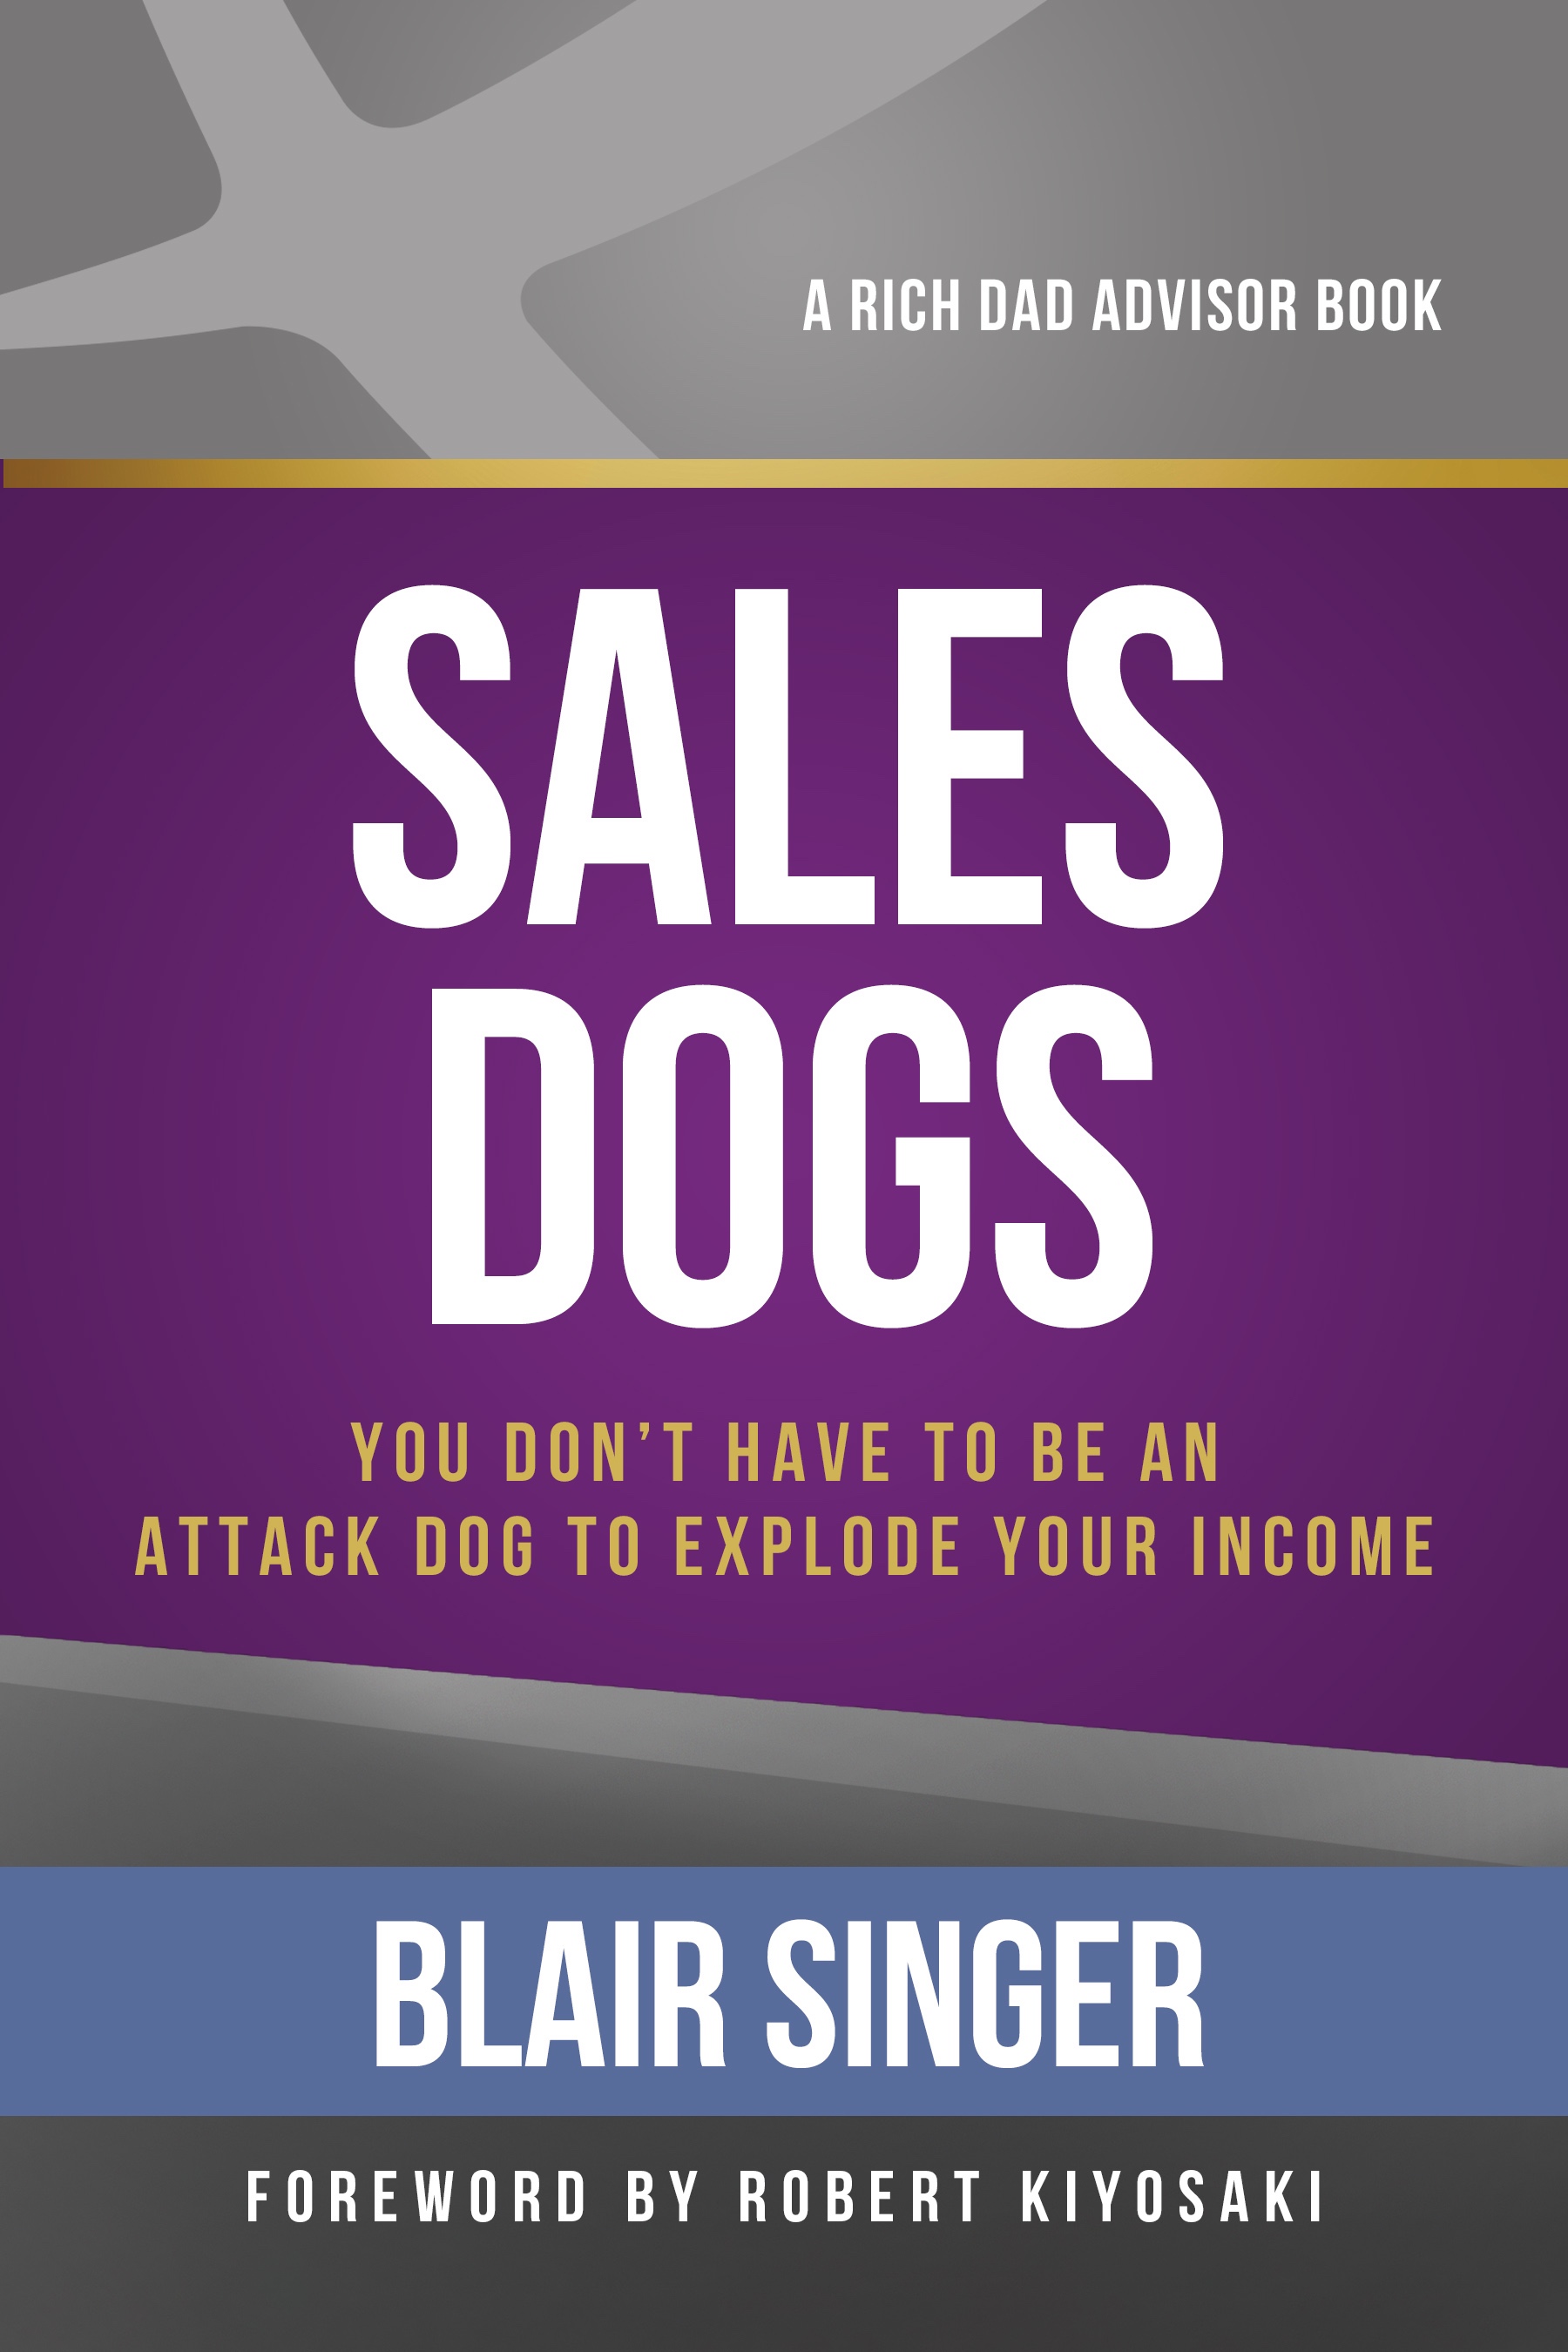 Sales Dogs by Rich Dad Advisor Blair Singer